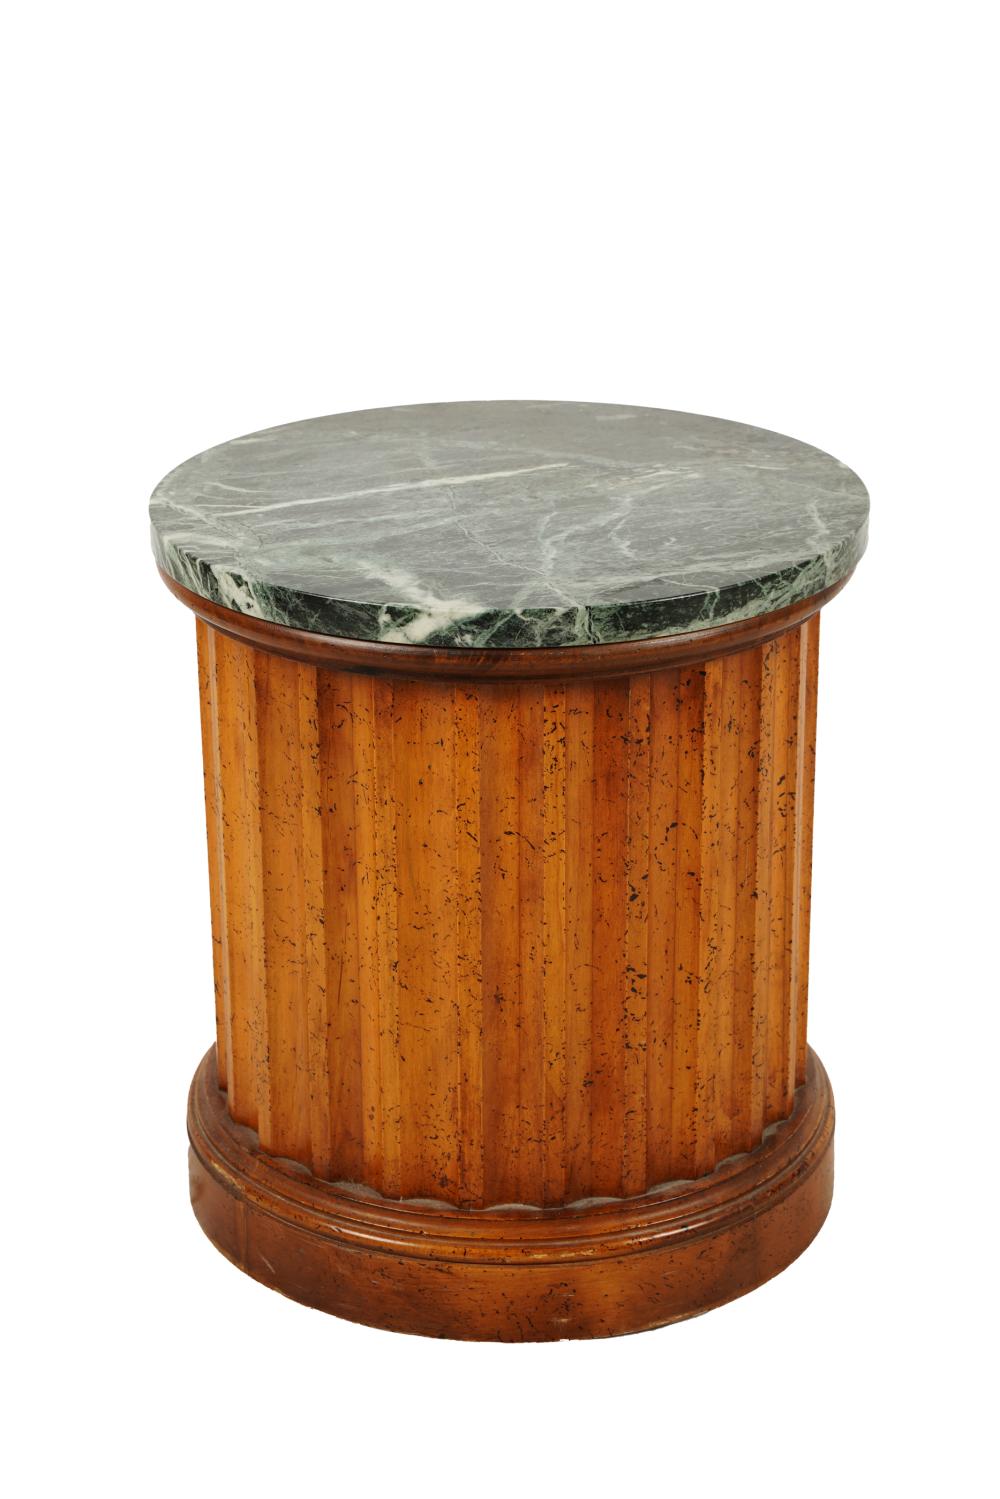 NEOCLASSIC STYLE FLUTED WOOD PEDESTALwith 3337dc